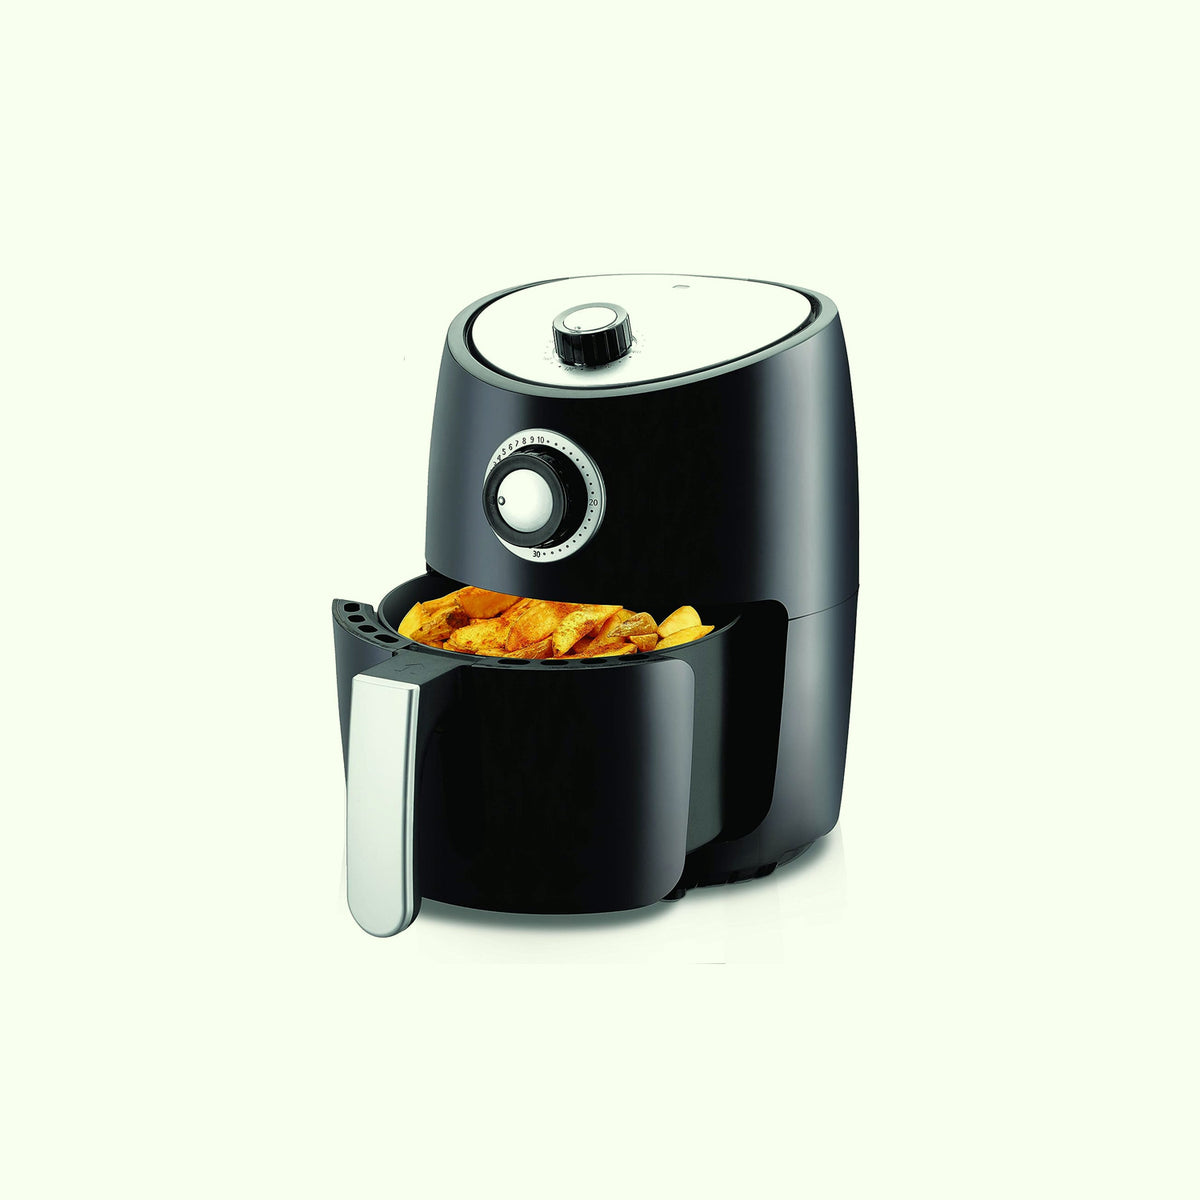  NutriChef Air Fryer, Halogen Infrared Convection Oven - Large  13 Quart Glass Air Fryer, Oil-Free Quick Healthy Meals Multicooker with  Time & Temperature Controls, Roast, Fry, Toast or Crisp : Home